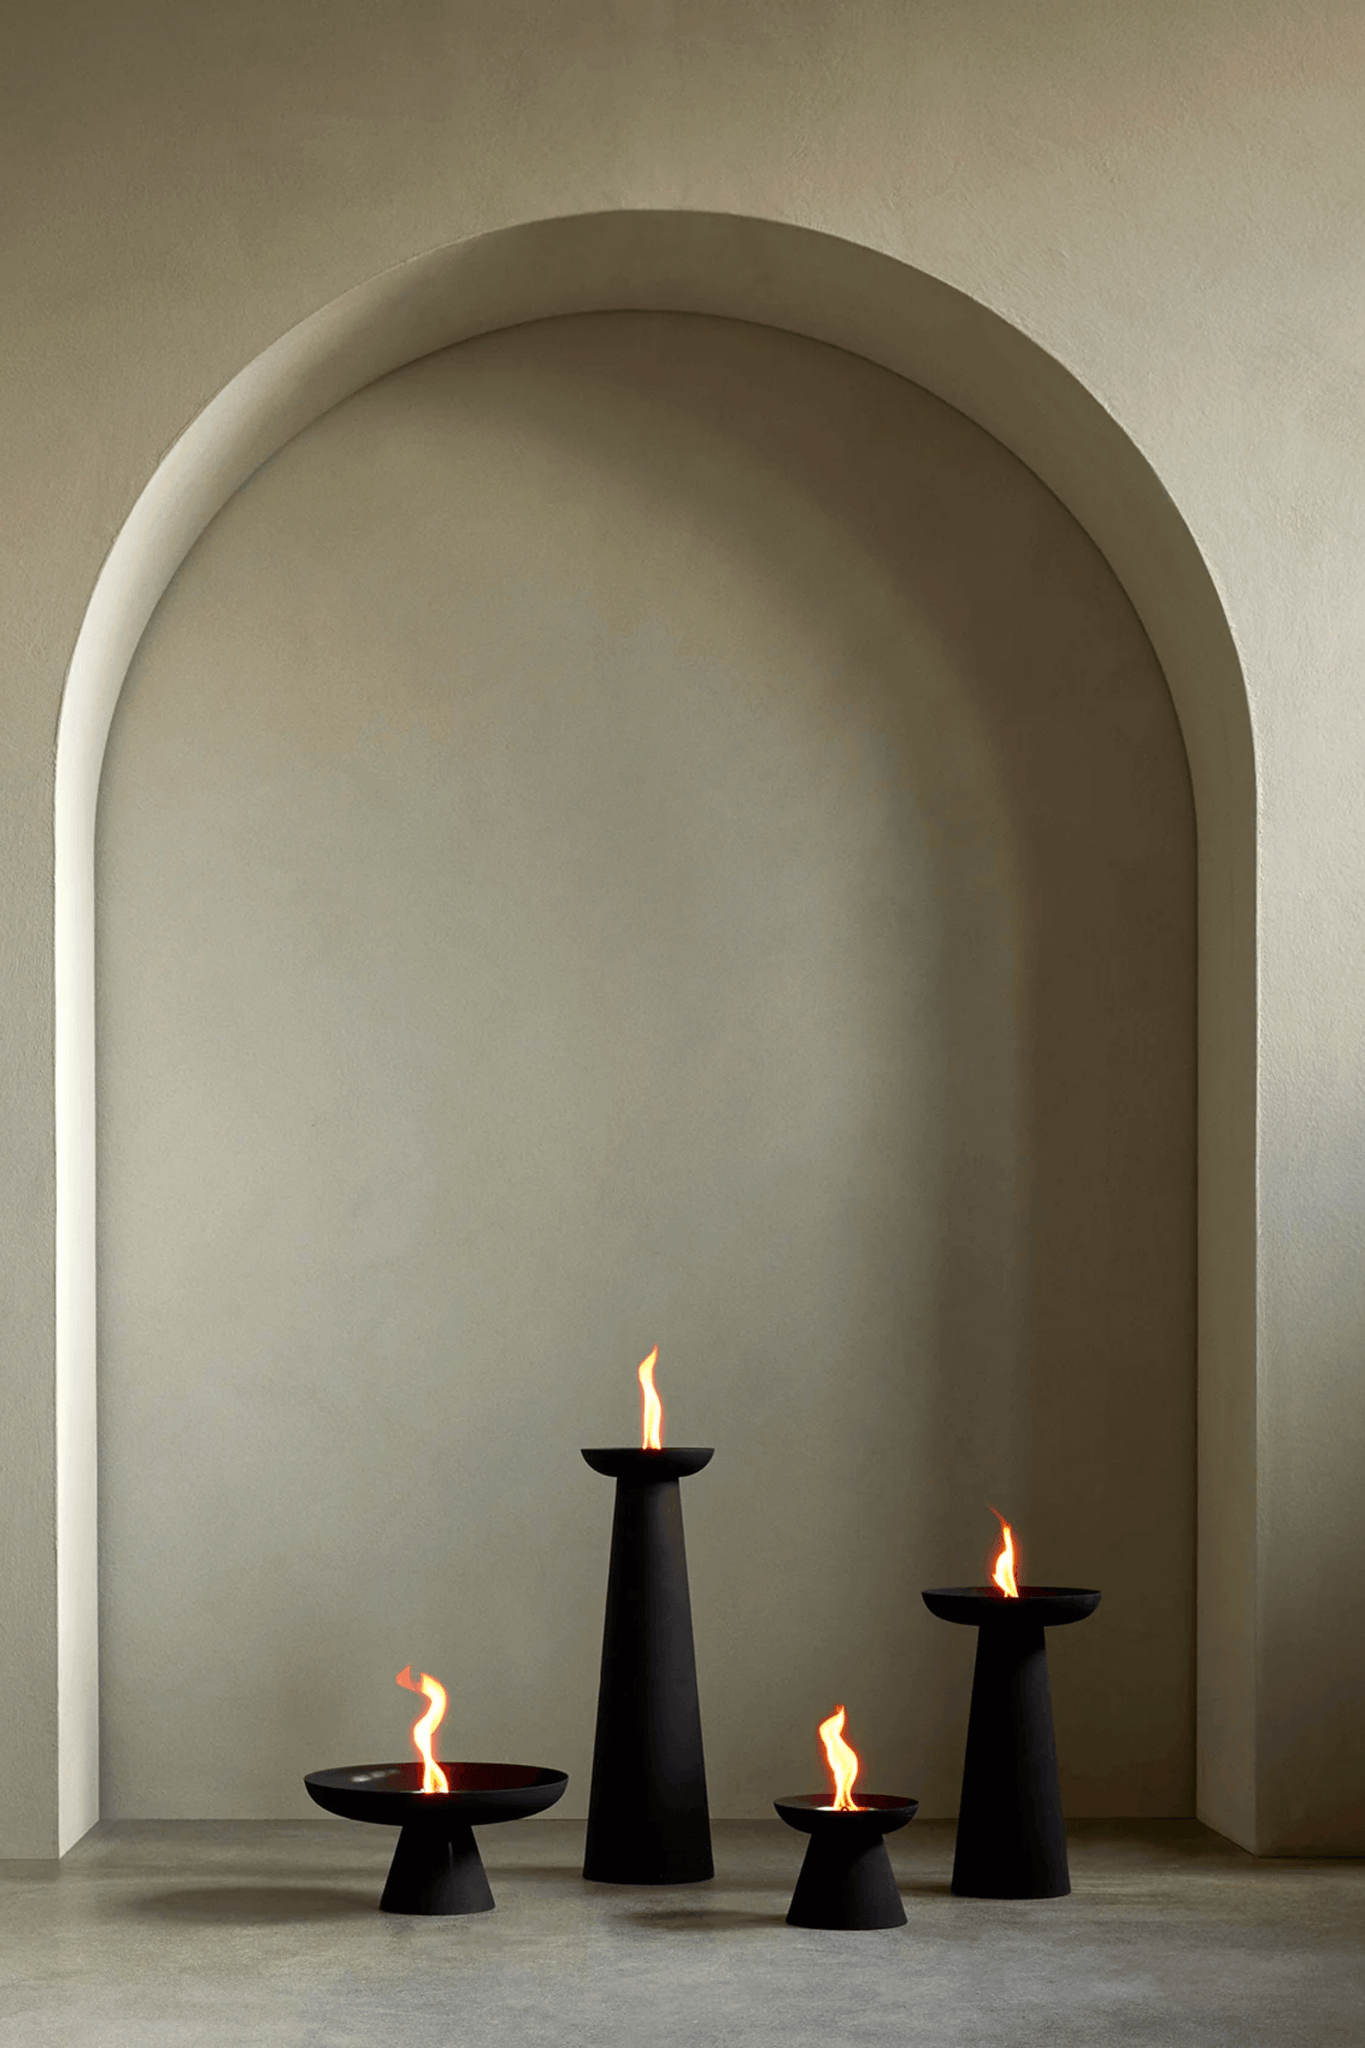 Small Black Meira Oil Lantern by Menu, shown lit in various sizes